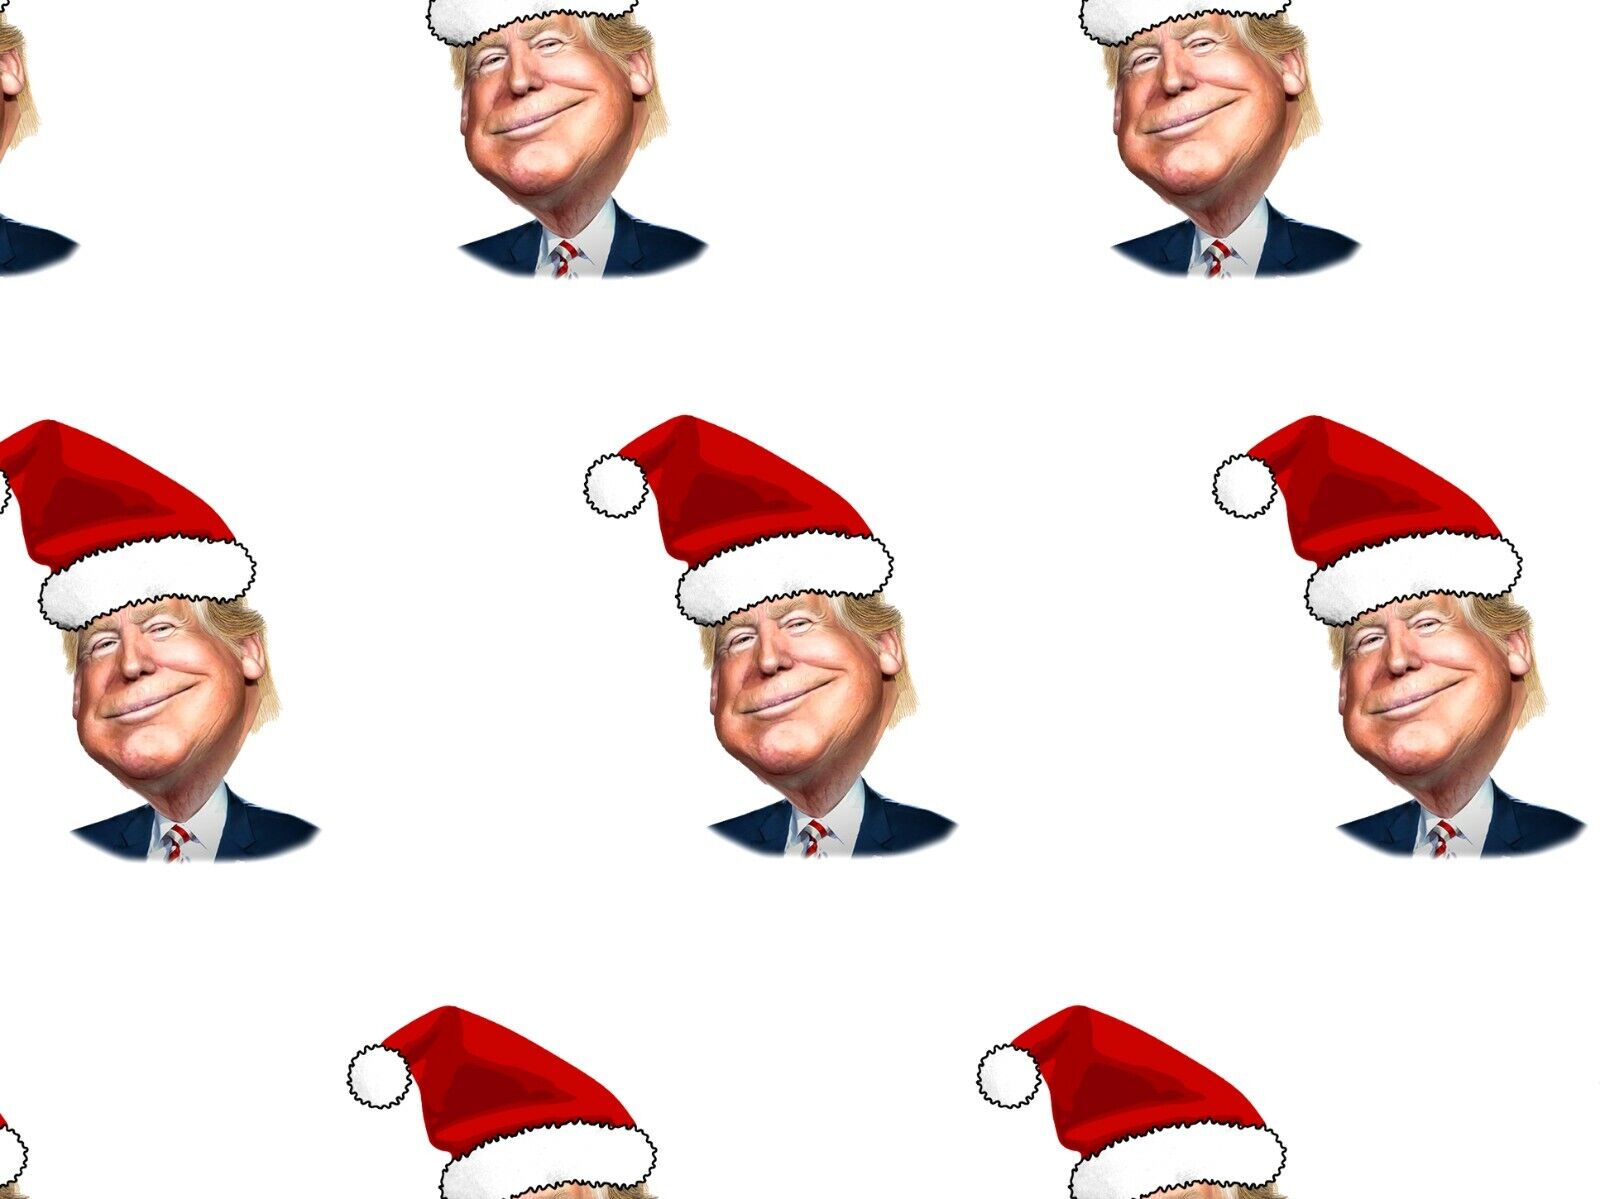 2-Pack: 28x30 inch Sheet Of Wrapping Paper: Trump in Santa Hat (christmas wrap)